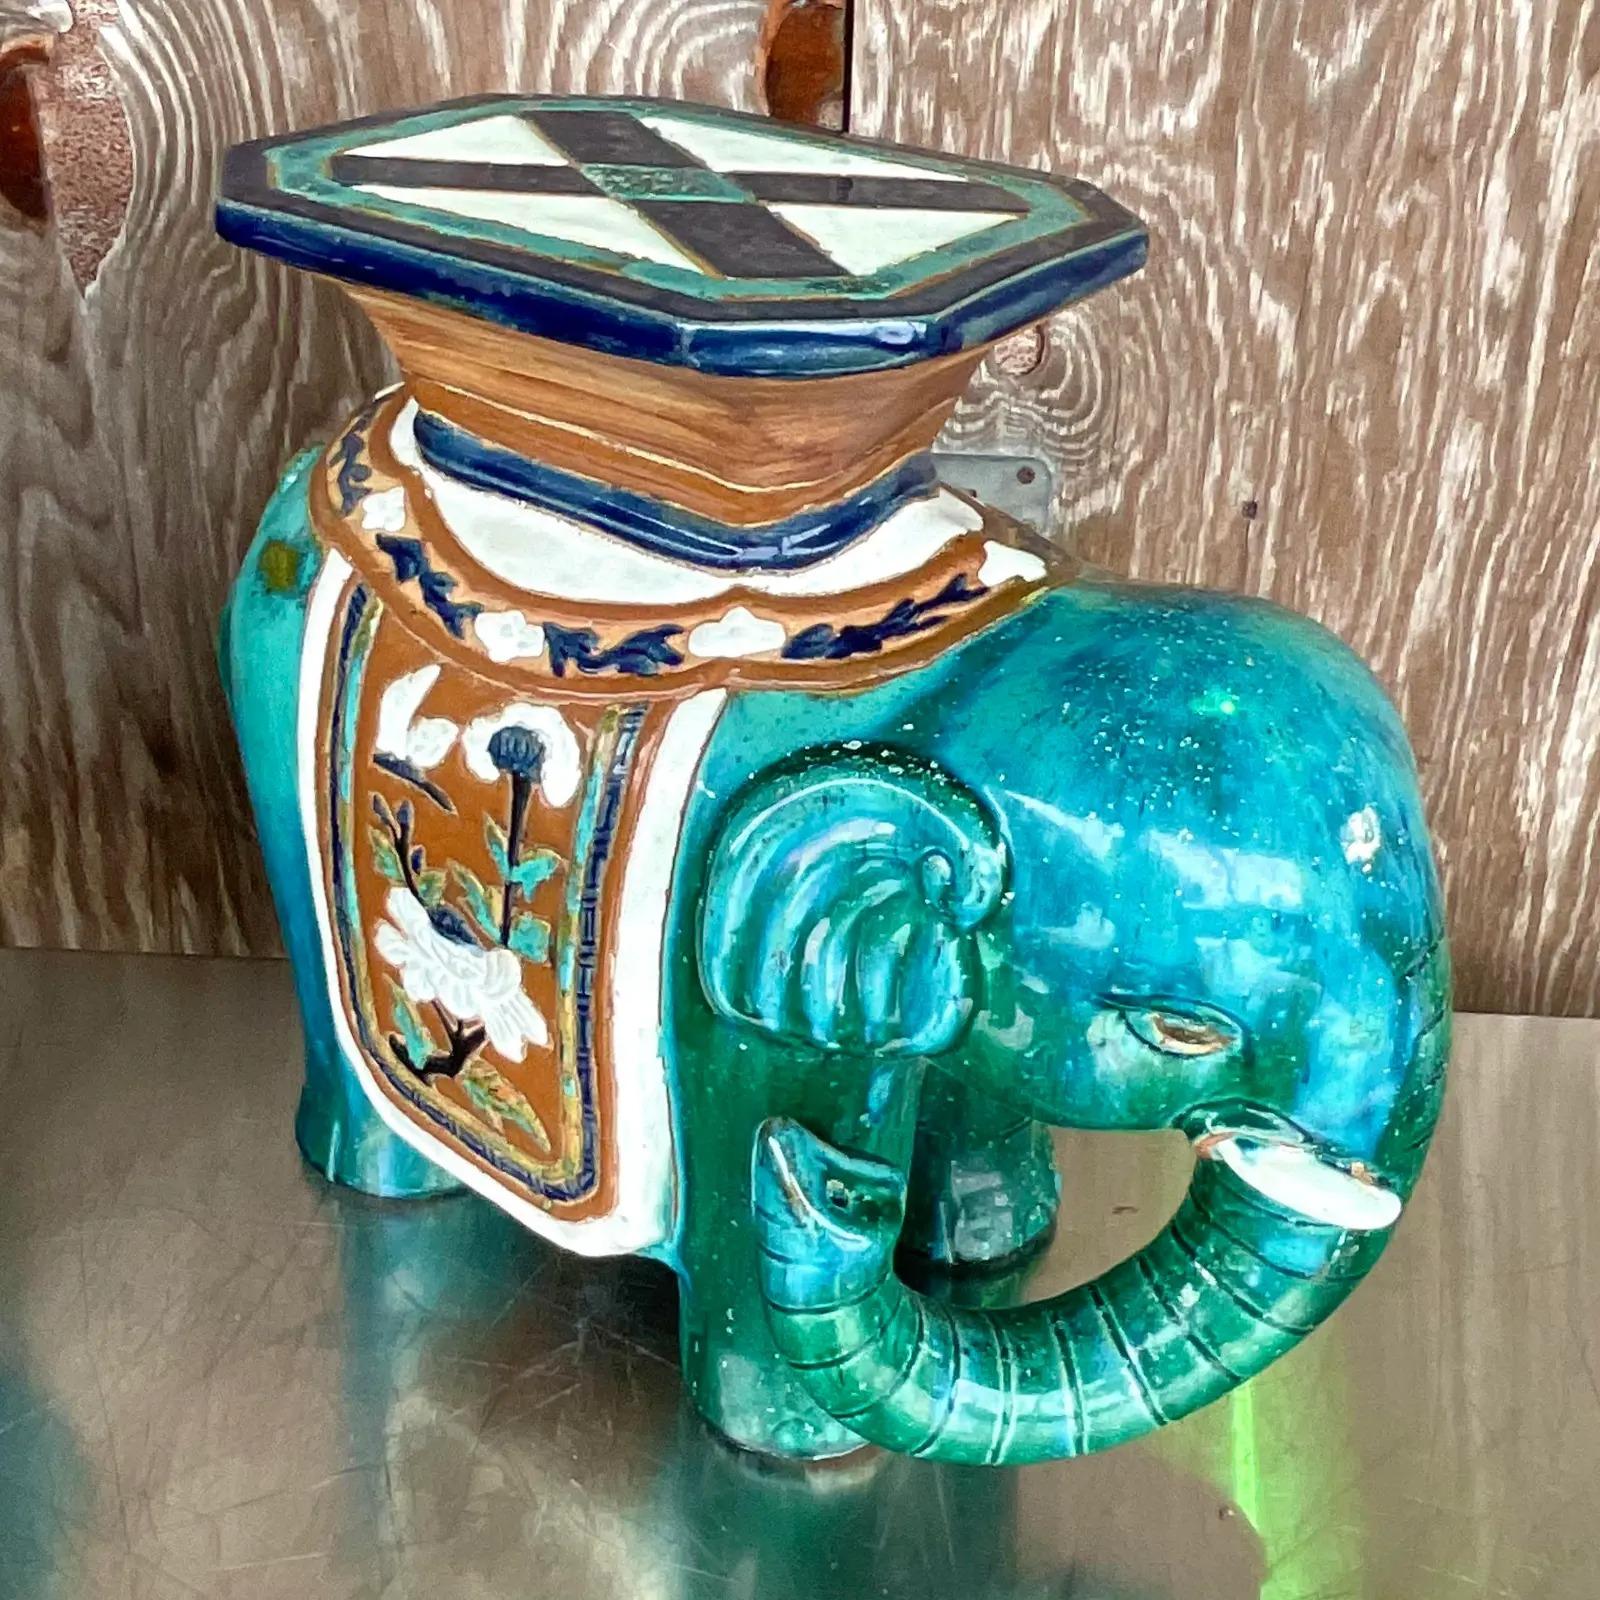 A fabulous Vintage Regency glazed ceramic elephant. A brilliant blue green color with a classic design. Trunk up for good luck! Acquired from a Palm Beach estate.